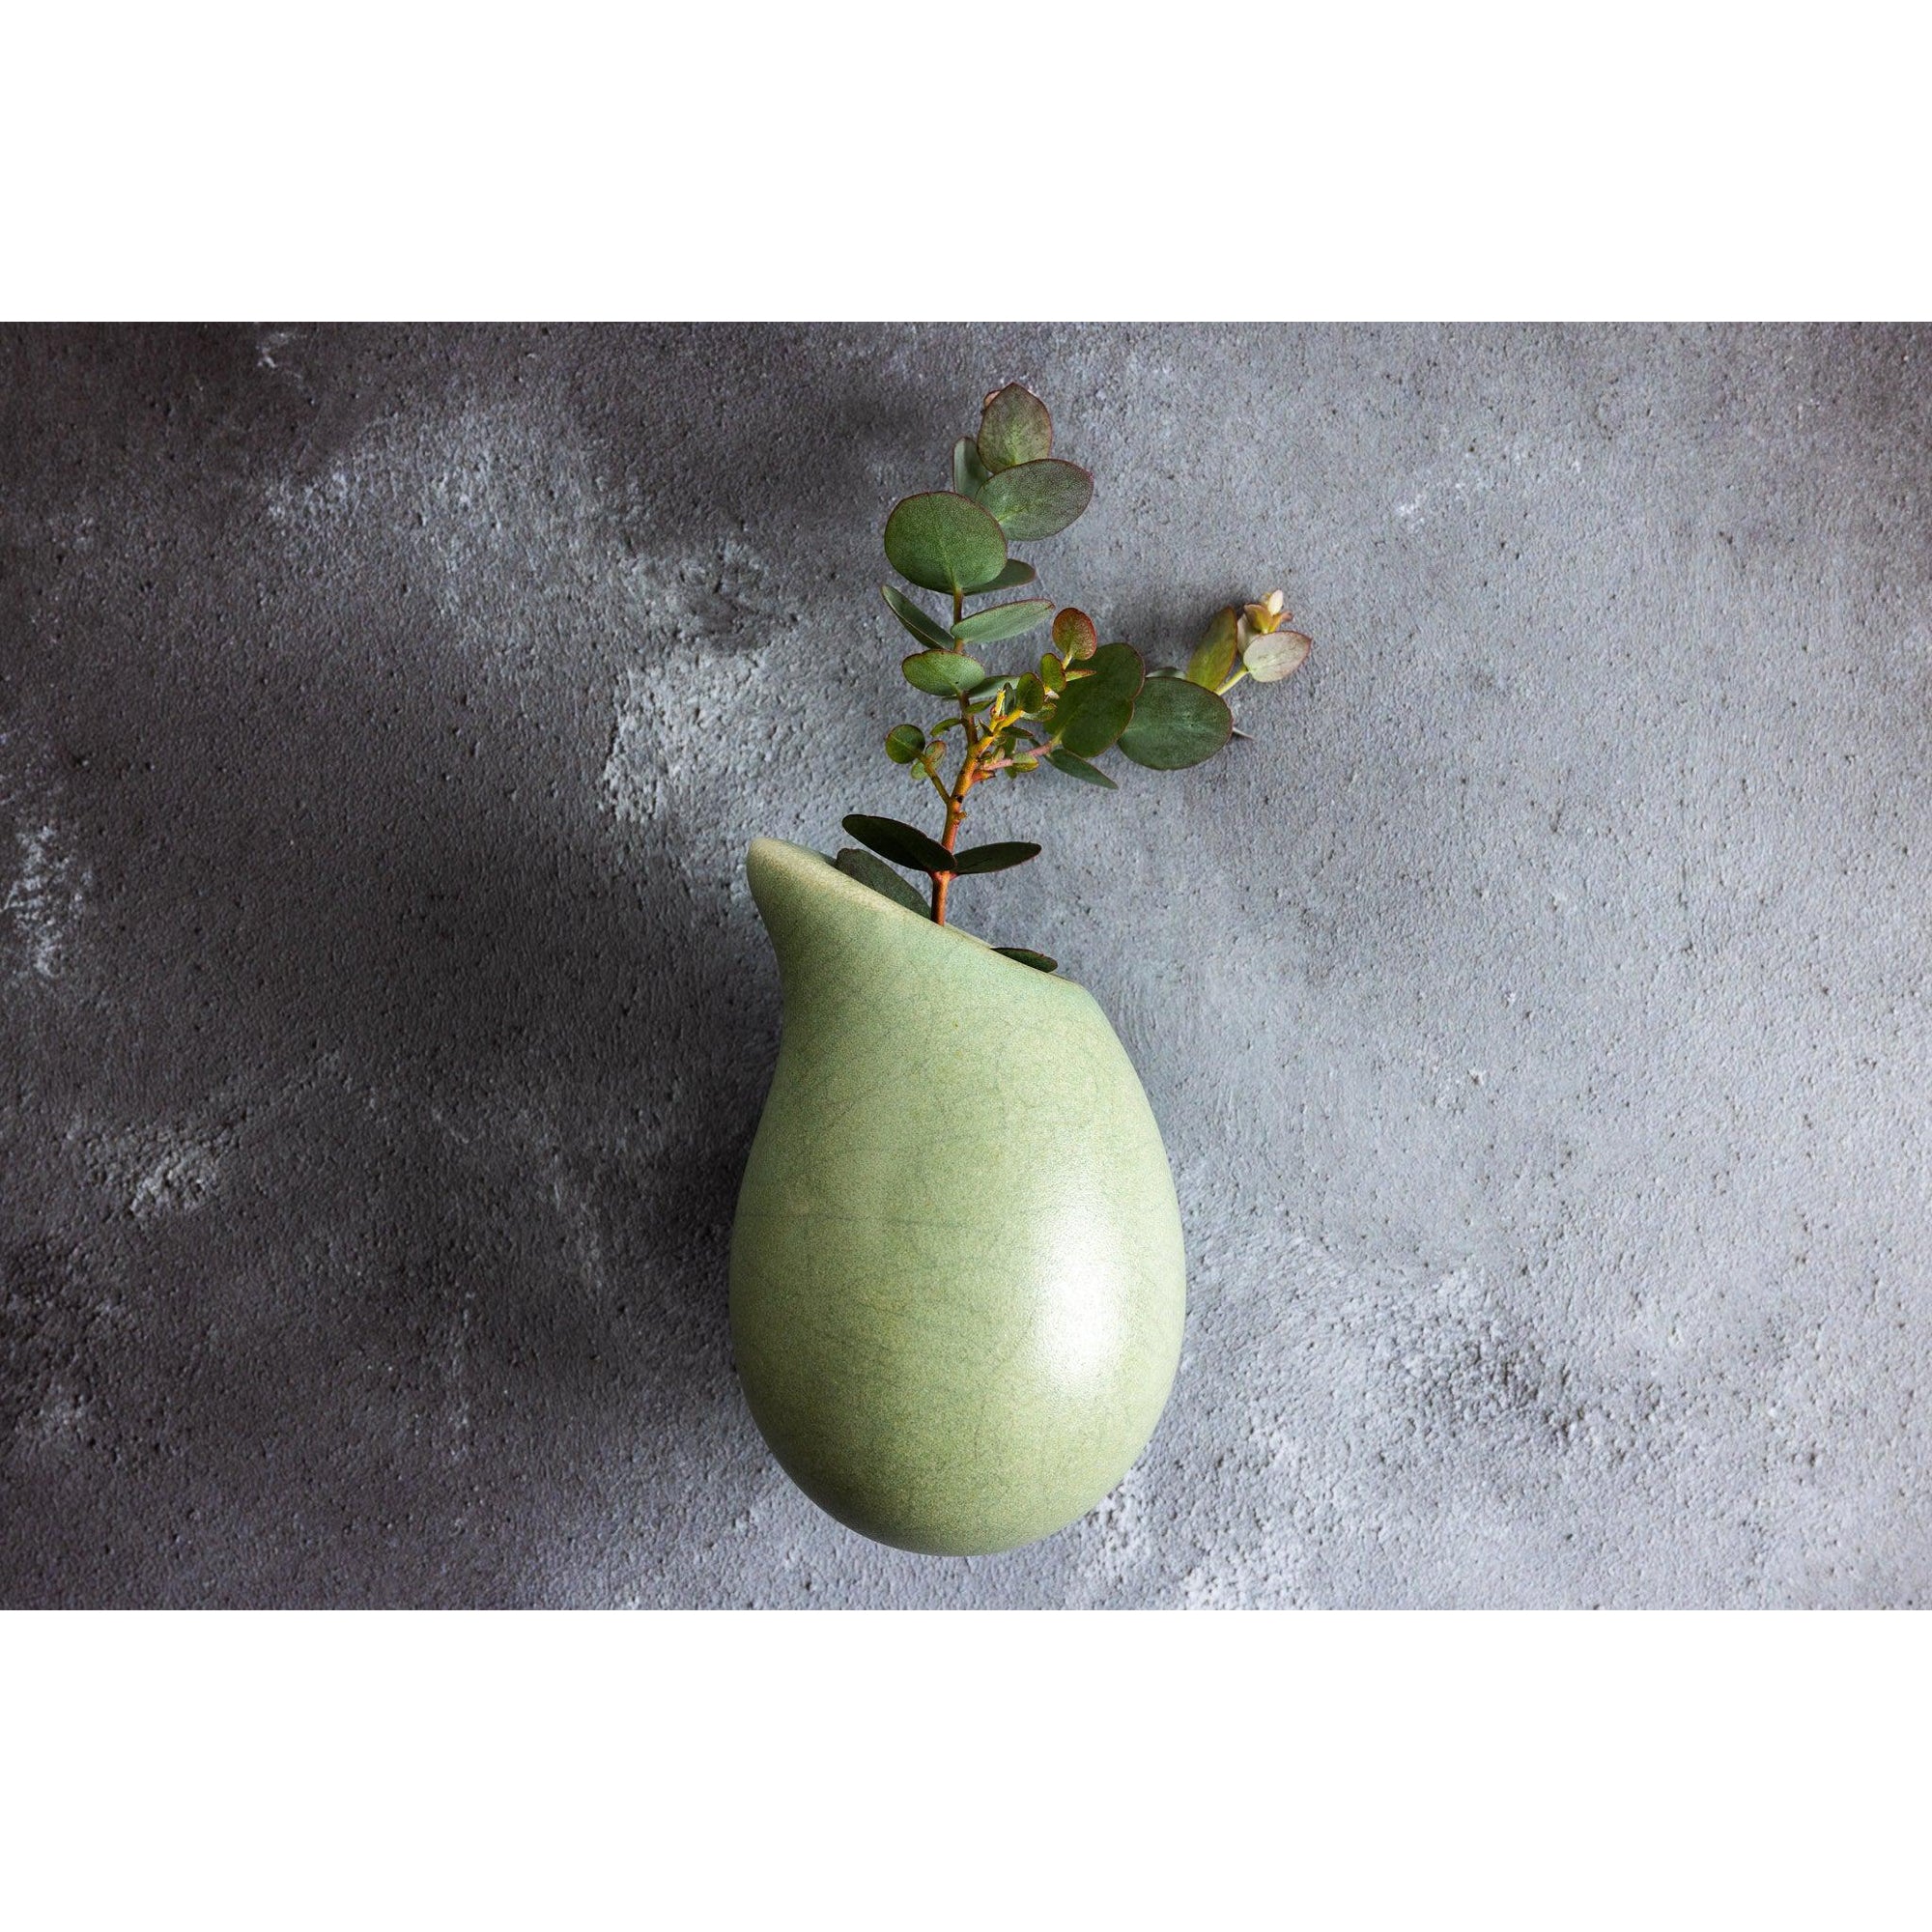 KSR1 Droplet Wall Vase by Kate Schuricht, available at Padstow Gallery, Cornwall